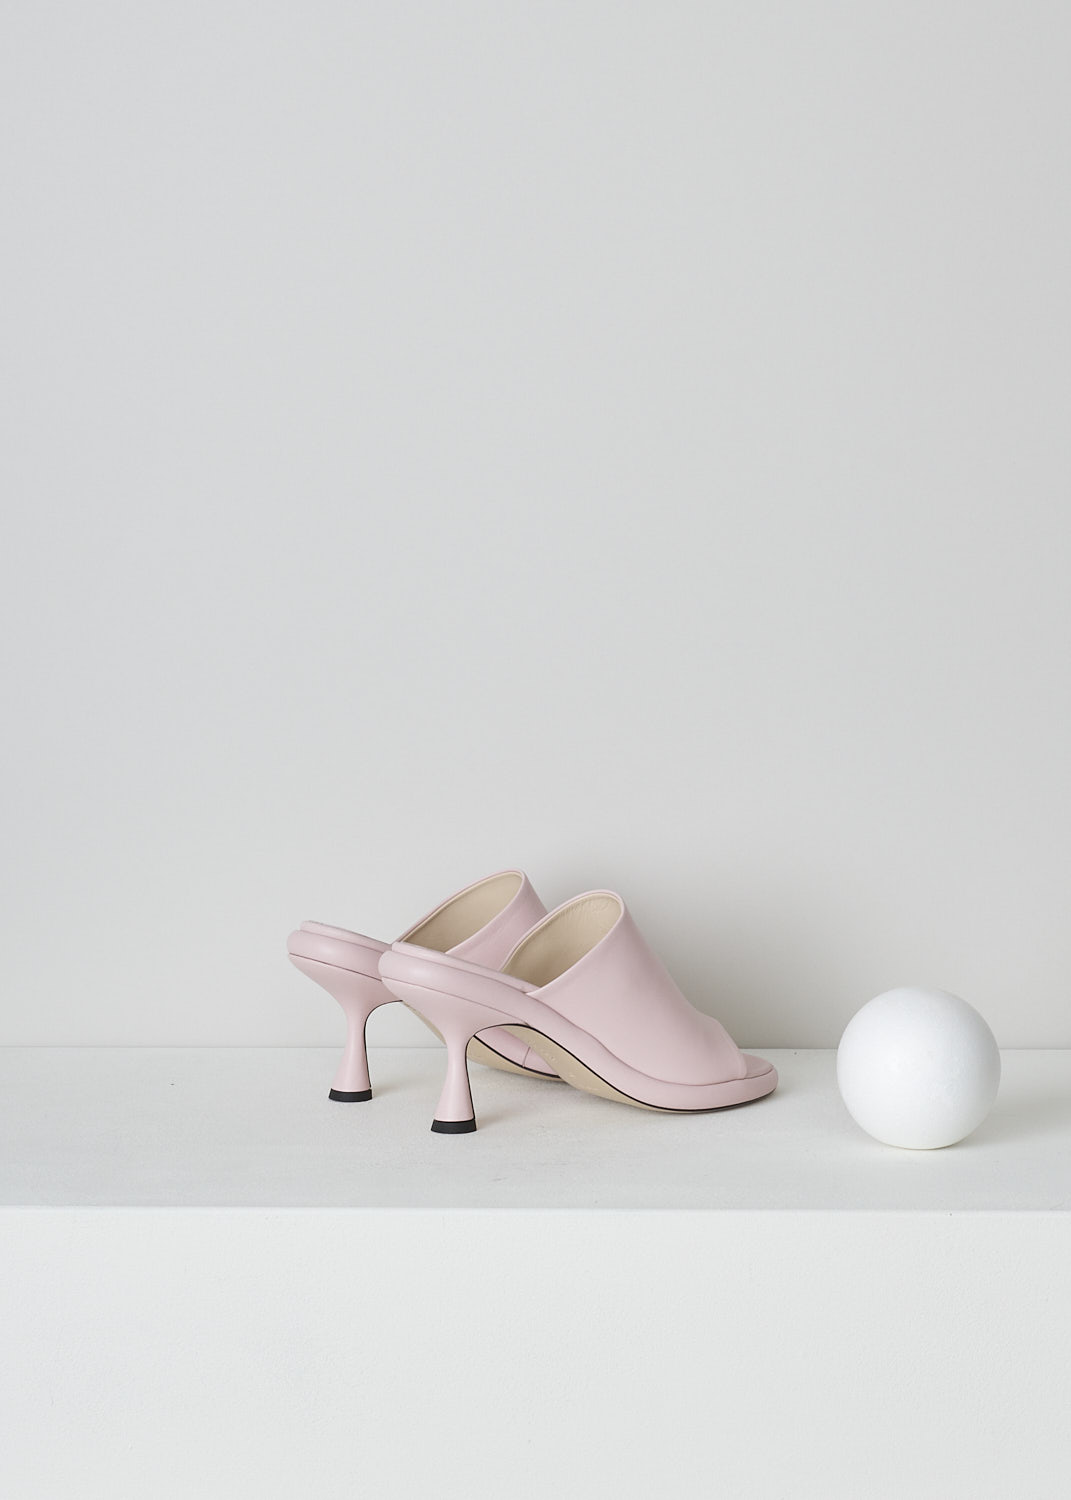 WANDLER, JUNE PLATFORM PUMPS IN SOFT PINK, 23202_871201_1862, Pink, Back, These soft pink heeled slip-on mules have a broad strap across the vamp, a rounded open-toe and a platform sole. The slip-on mules have a mid-height spool heel.

